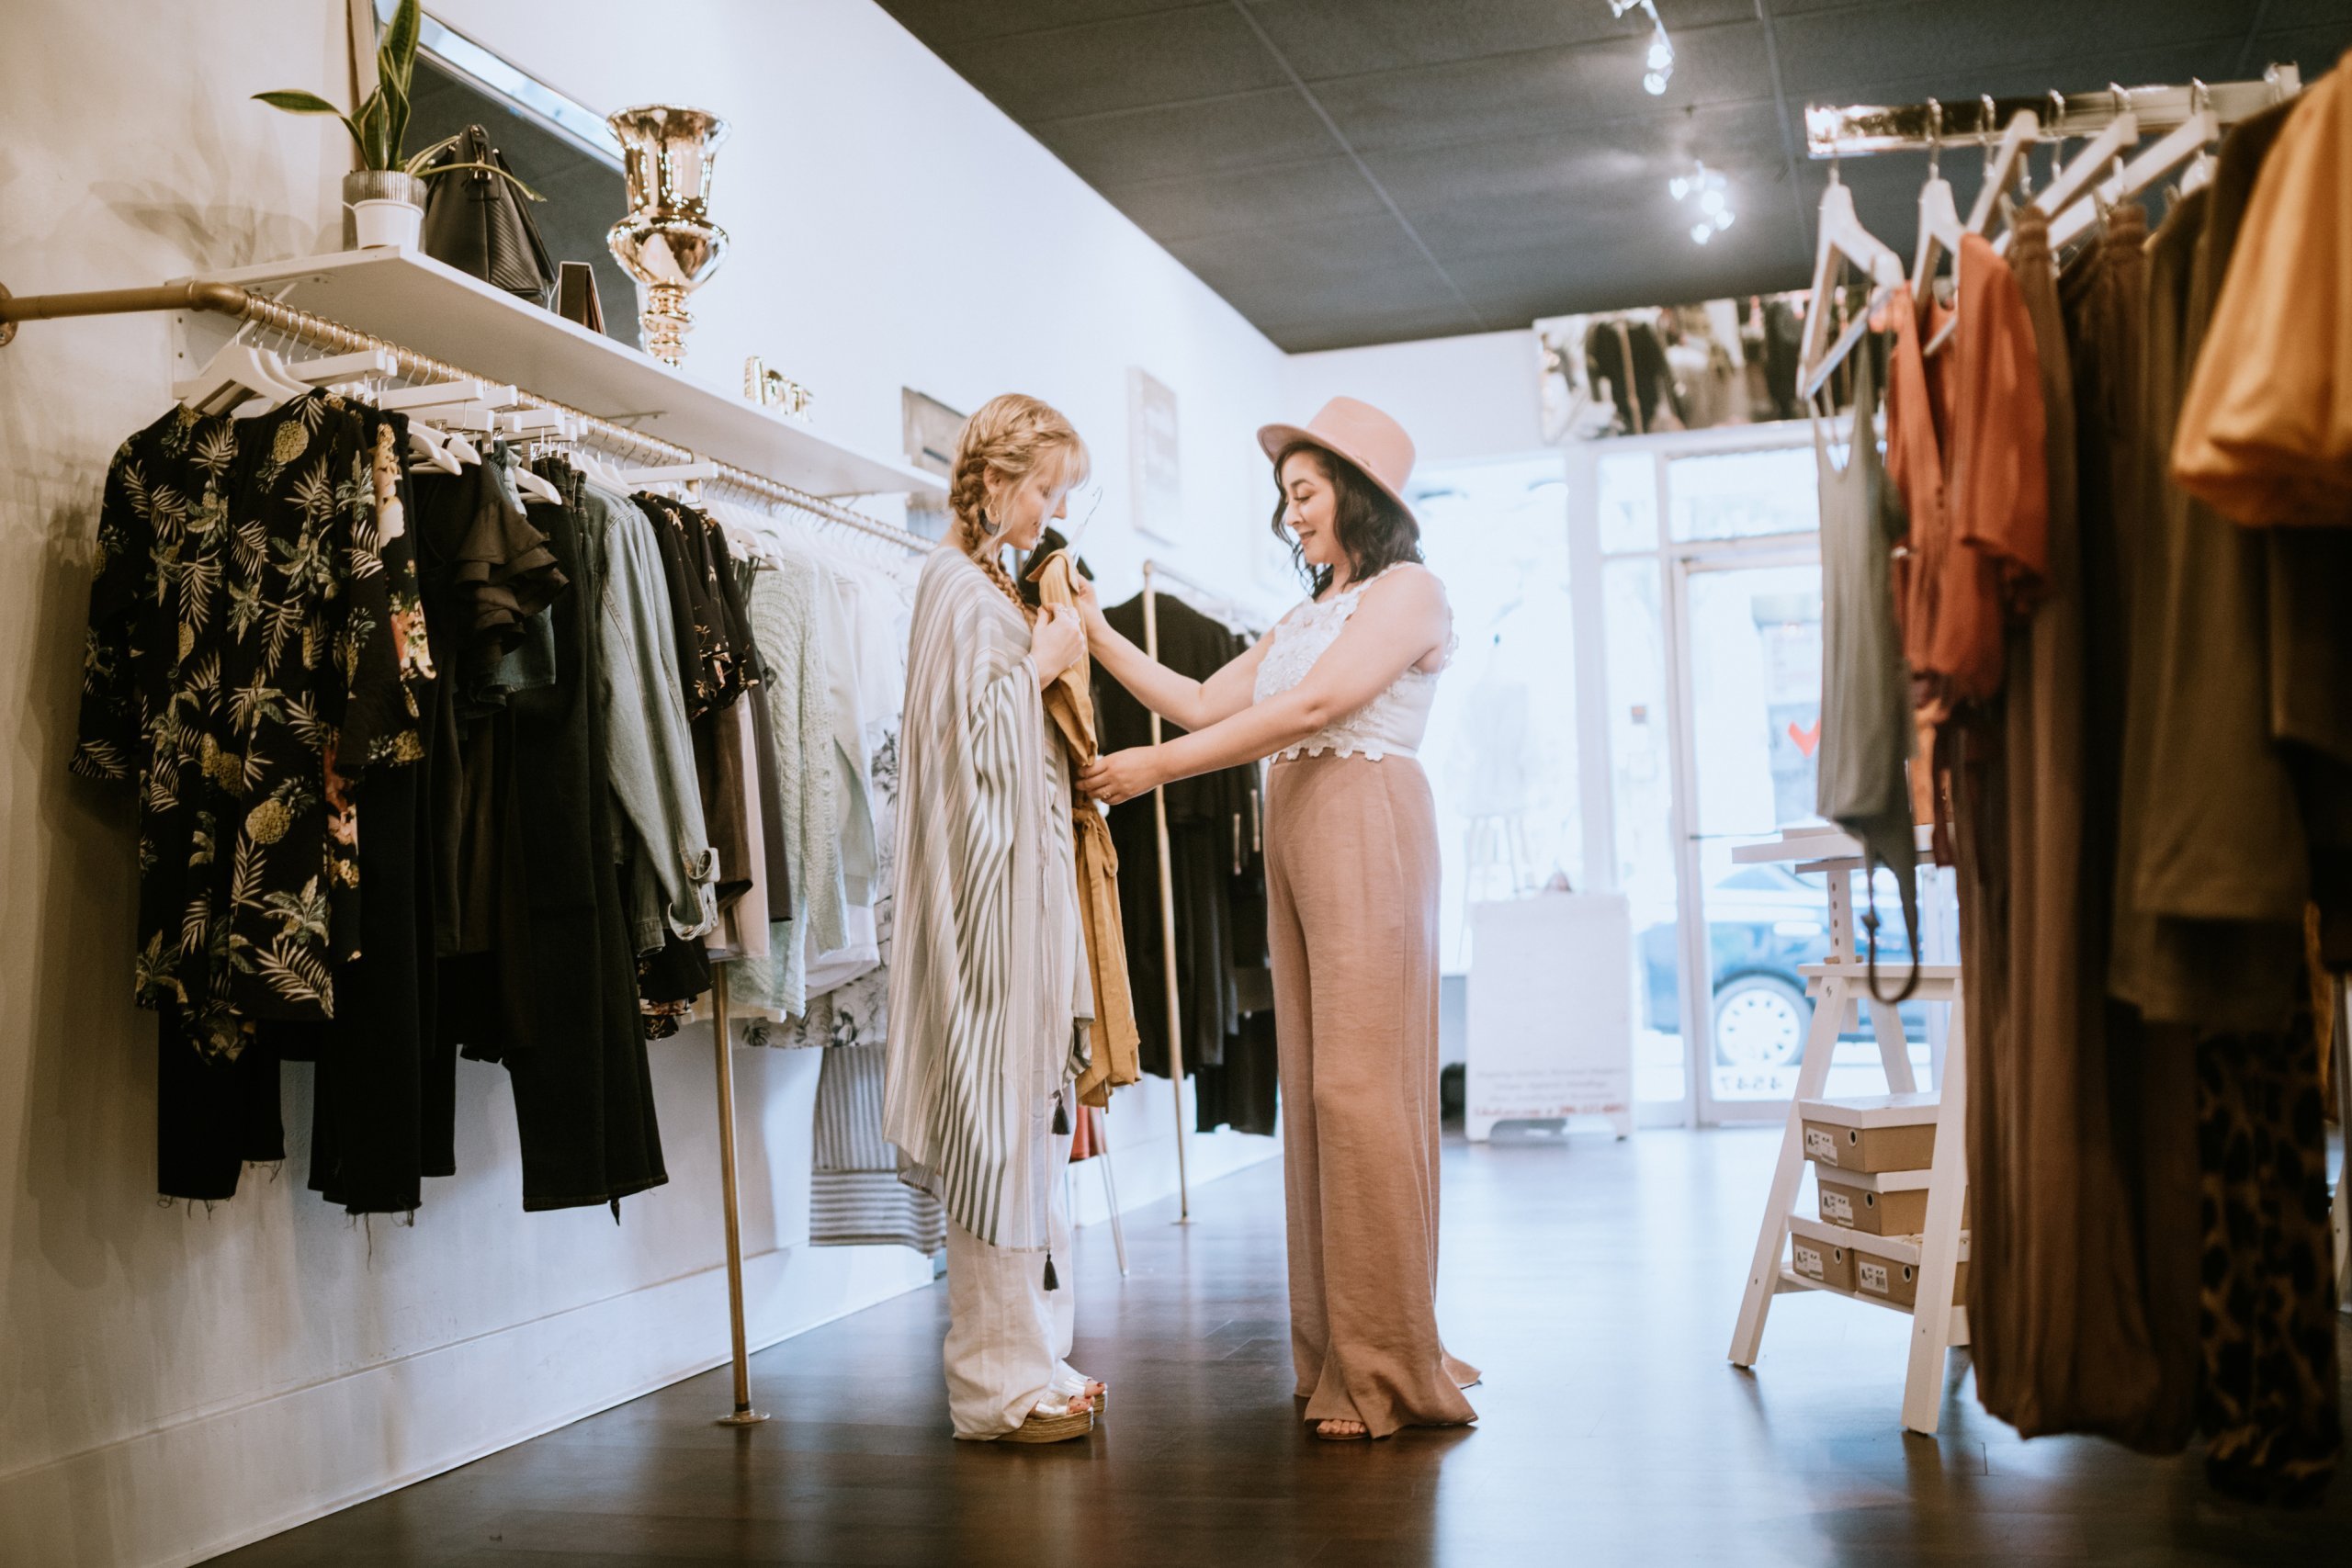 How can you Stock Wholesale Women's Clothing in your Retail Store?